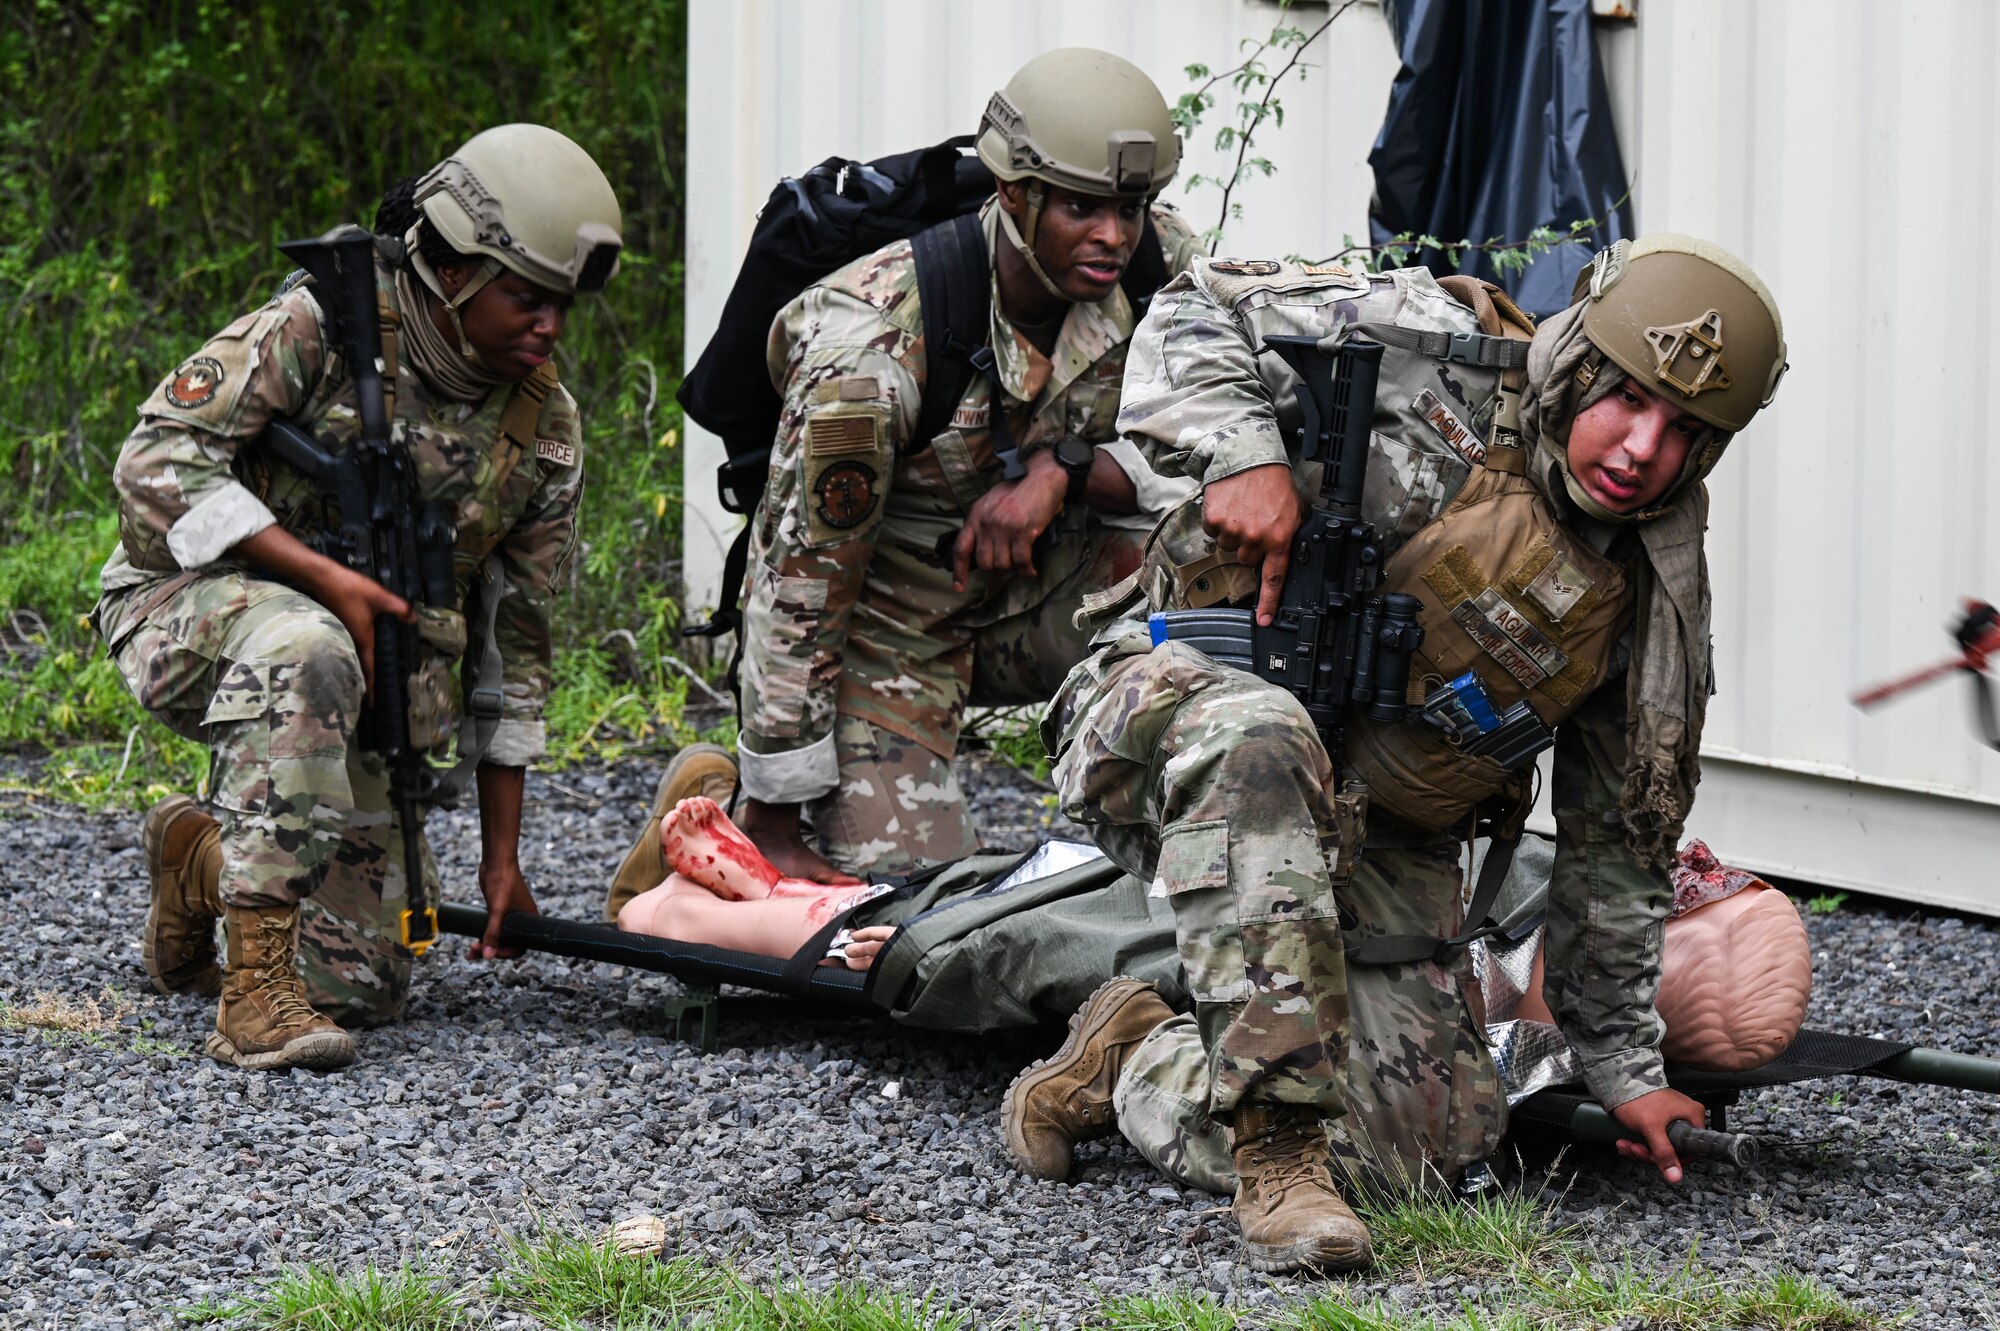 Airmen from the 647th Security Forces Squadron and the 15th Medical Group perform a litter carry during a joint field training exercise at Joint Base Pearl Harbor-Hickam, Hawaii, Jan. 12, 2022. A volunteer participated in moulage and two additional human patient manikins were implanted in the exercise to provide realistic combat scenarios for medical personnel. (U.S. Air Force photo by Staff Sgt. Alan Ricker)